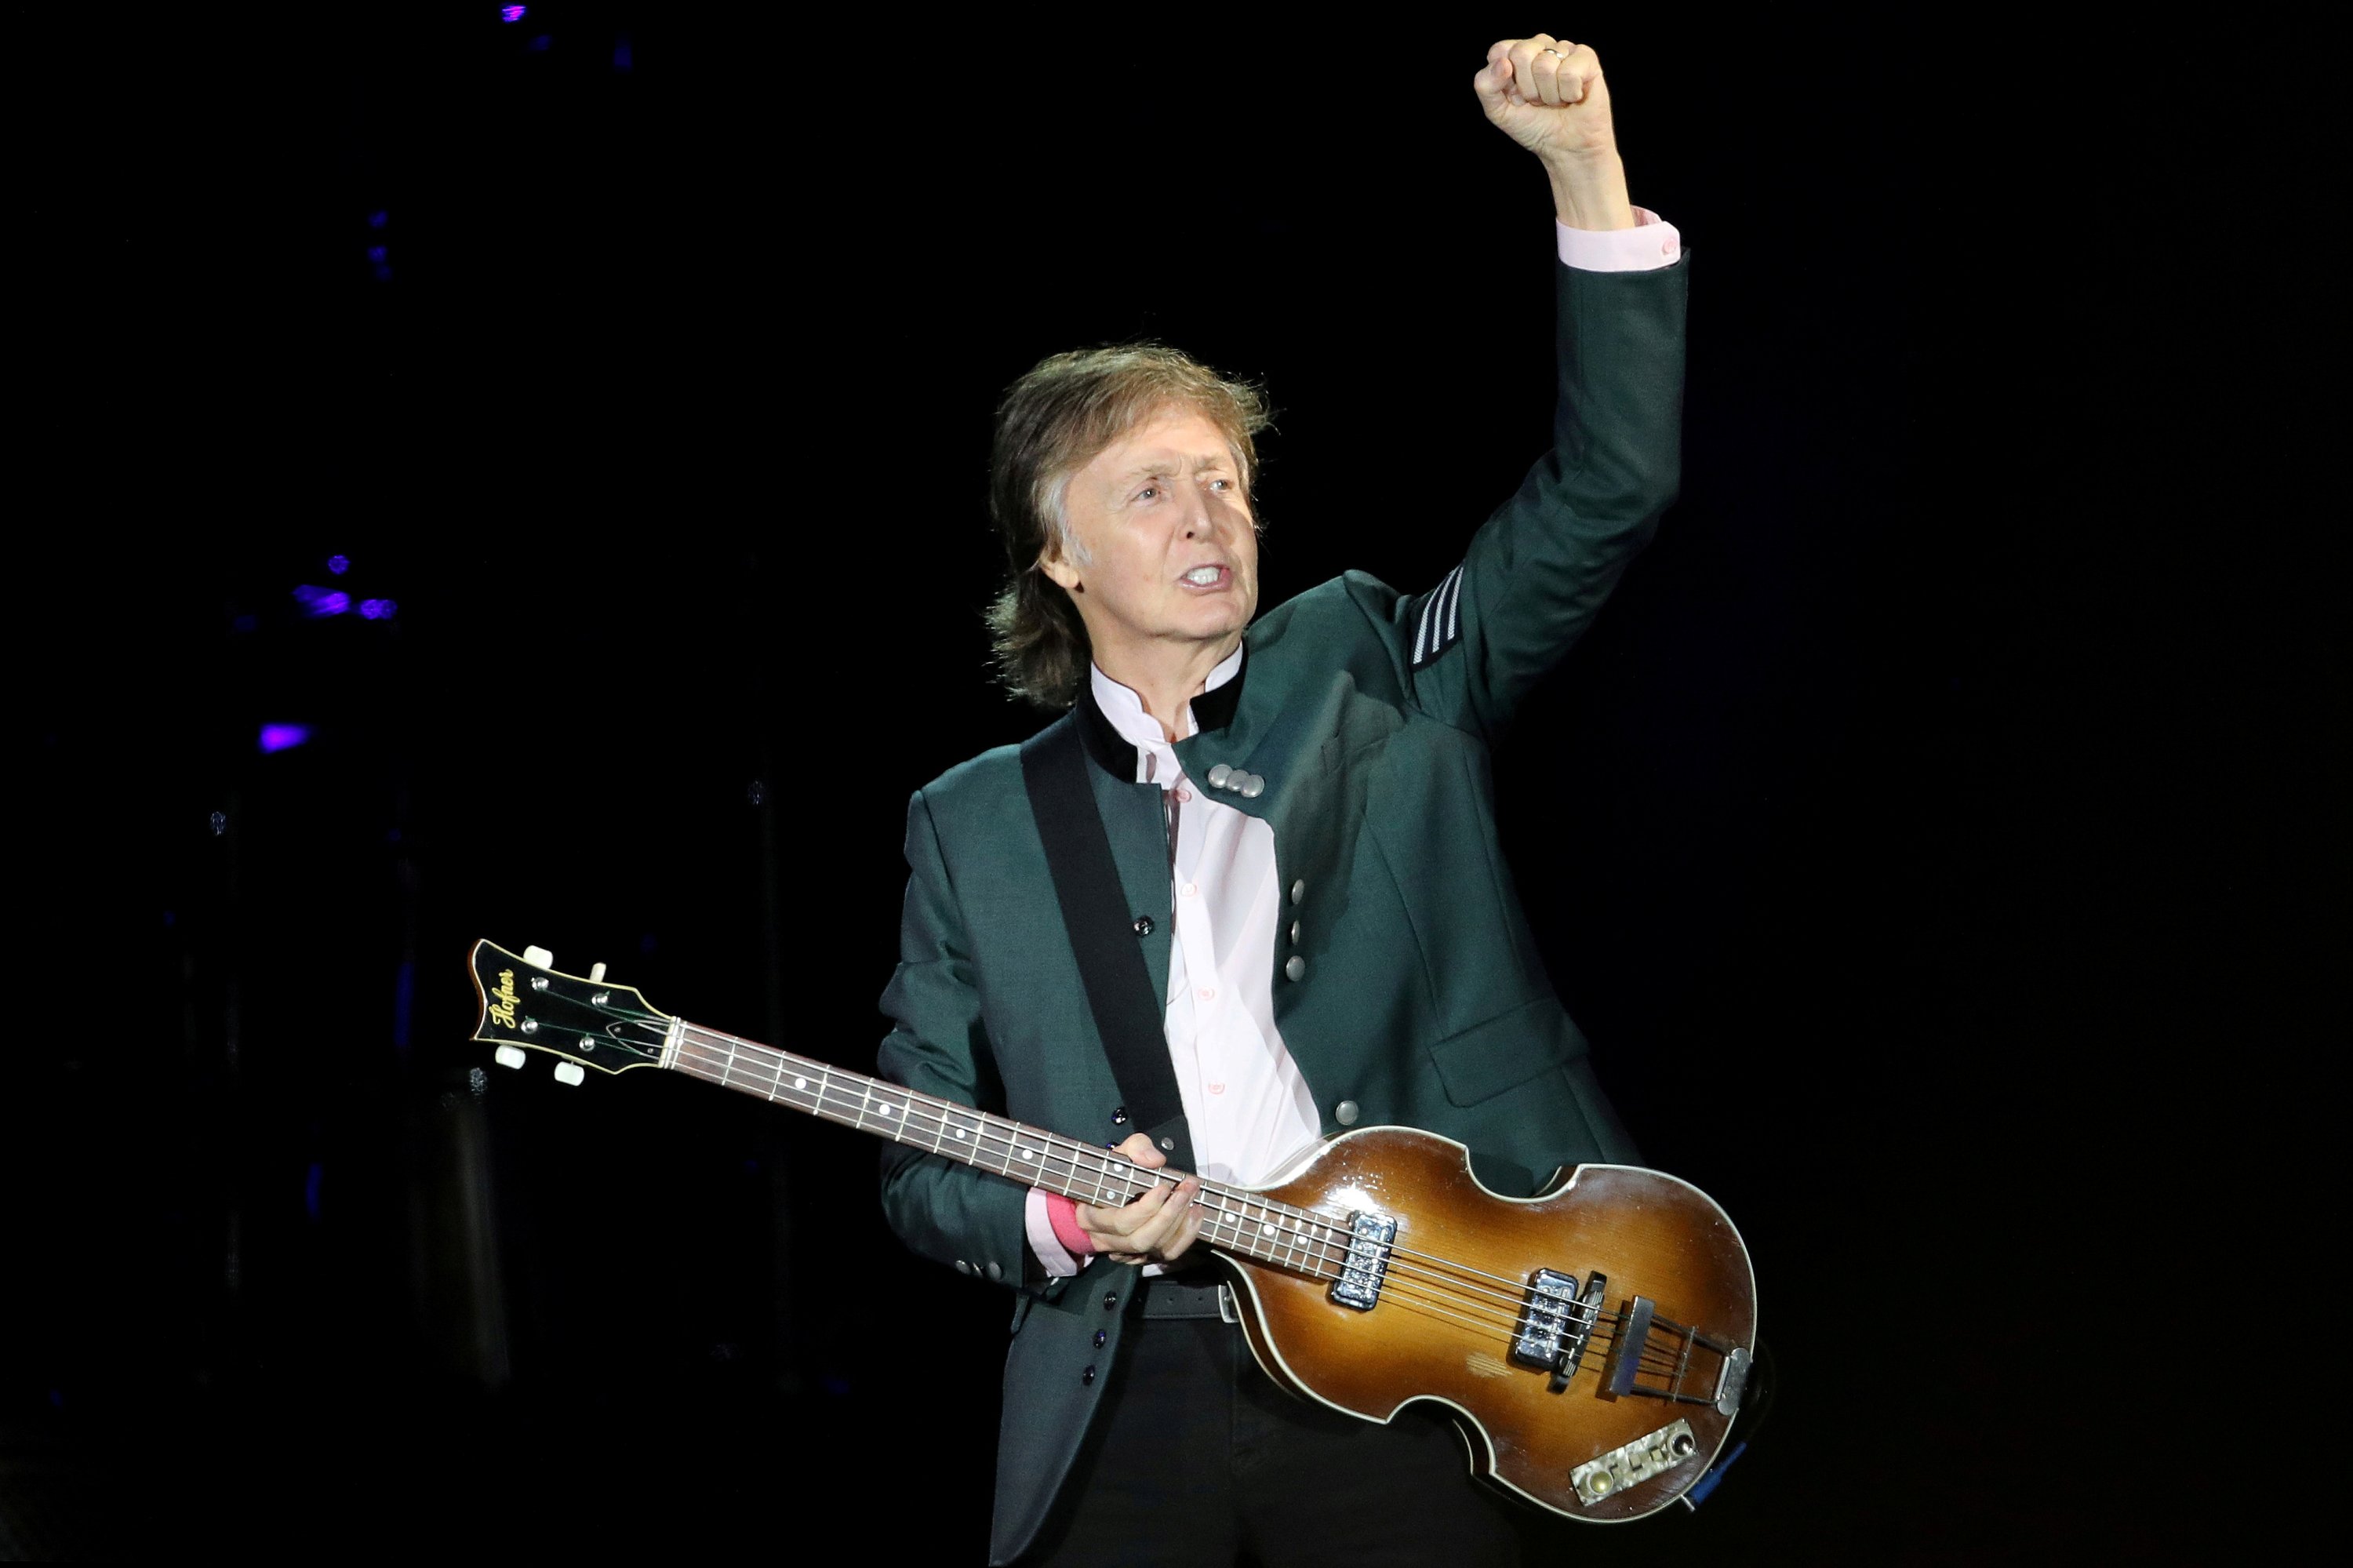 British musician Paul McCartney performs during the 'One on One' tour concert in Porto Alegre, Brazil, Oct. 13, 2017. (REUTERS Photo)